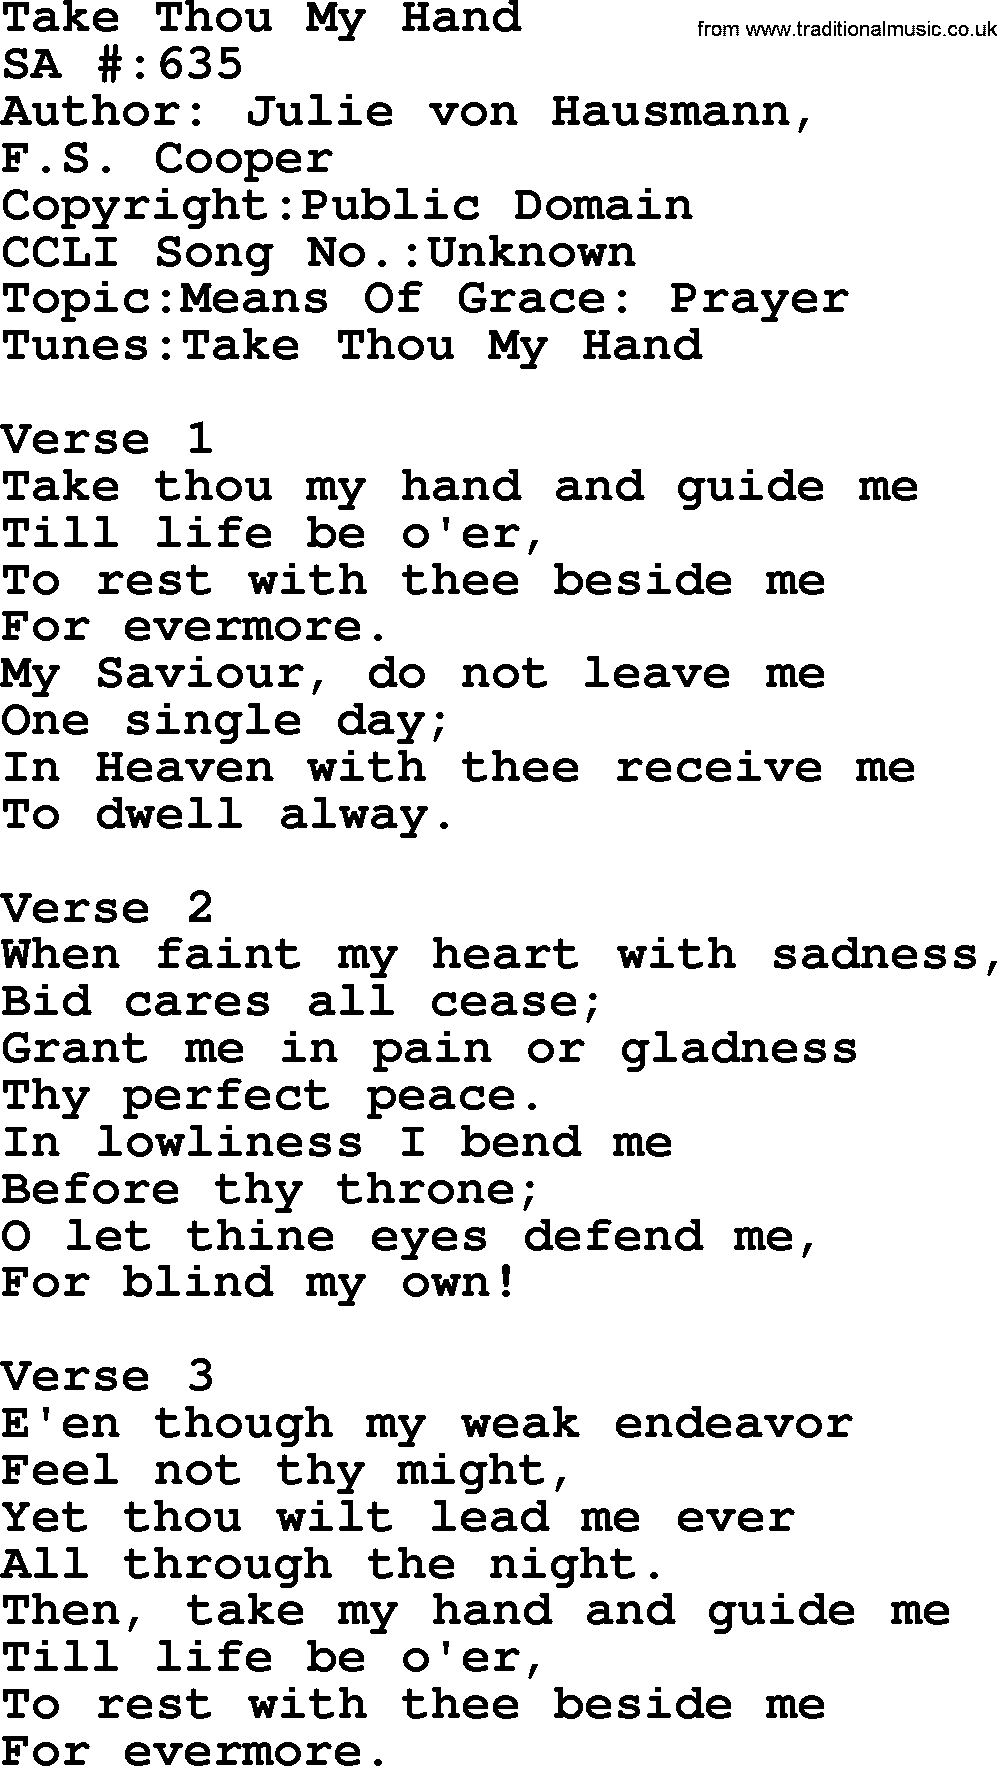 Salvation Army Hymnal, title: Take Thou My Hand, with lyrics and PDF,